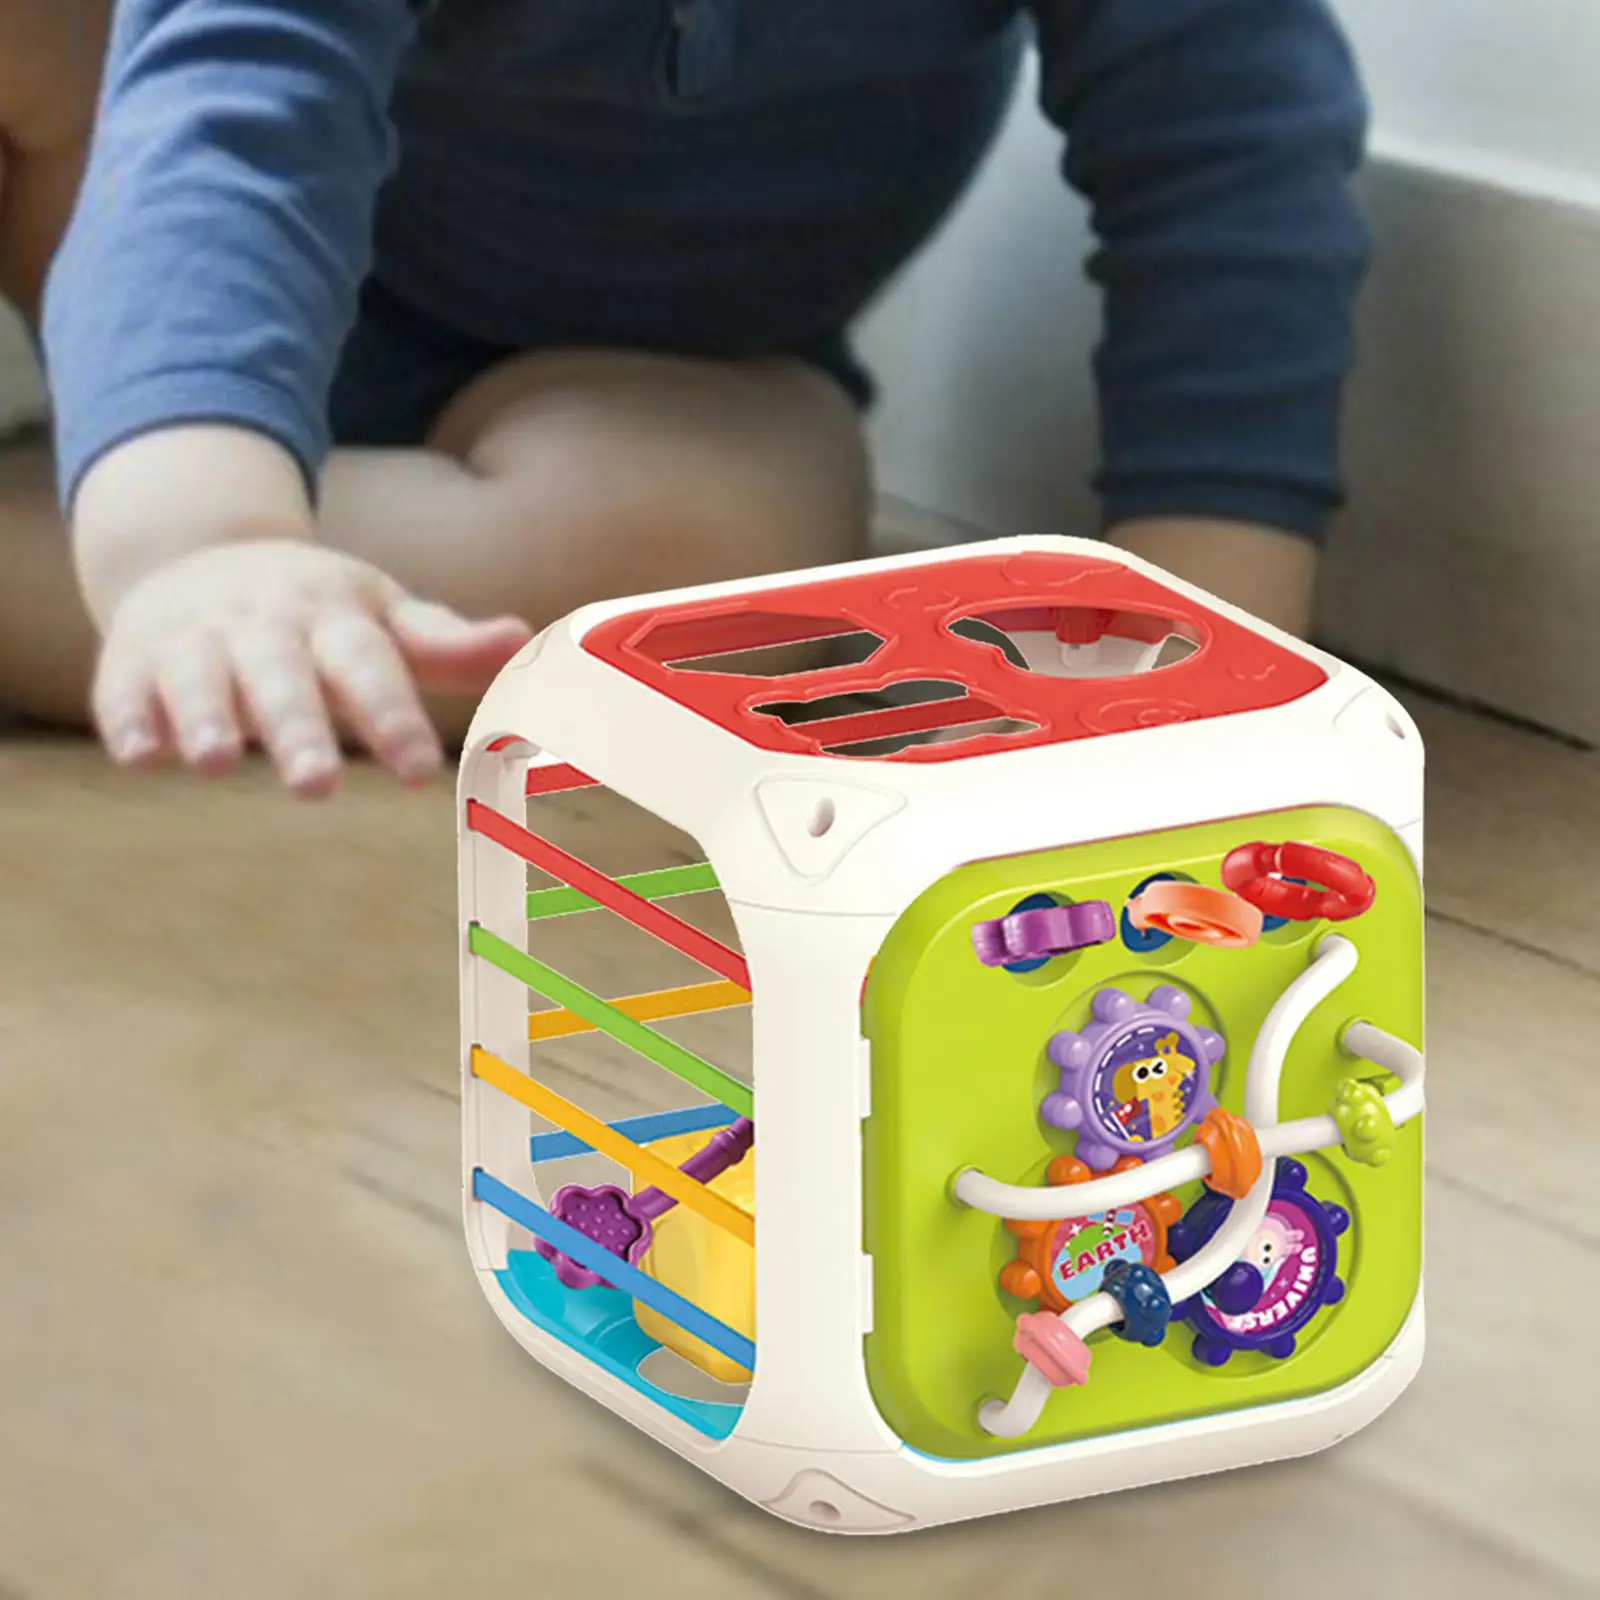 Sensory Bin Shape Sorter Toys Educational Fine Motor Skills Color Recognition Matching for Baby Toddlers Birthday Gift Kids